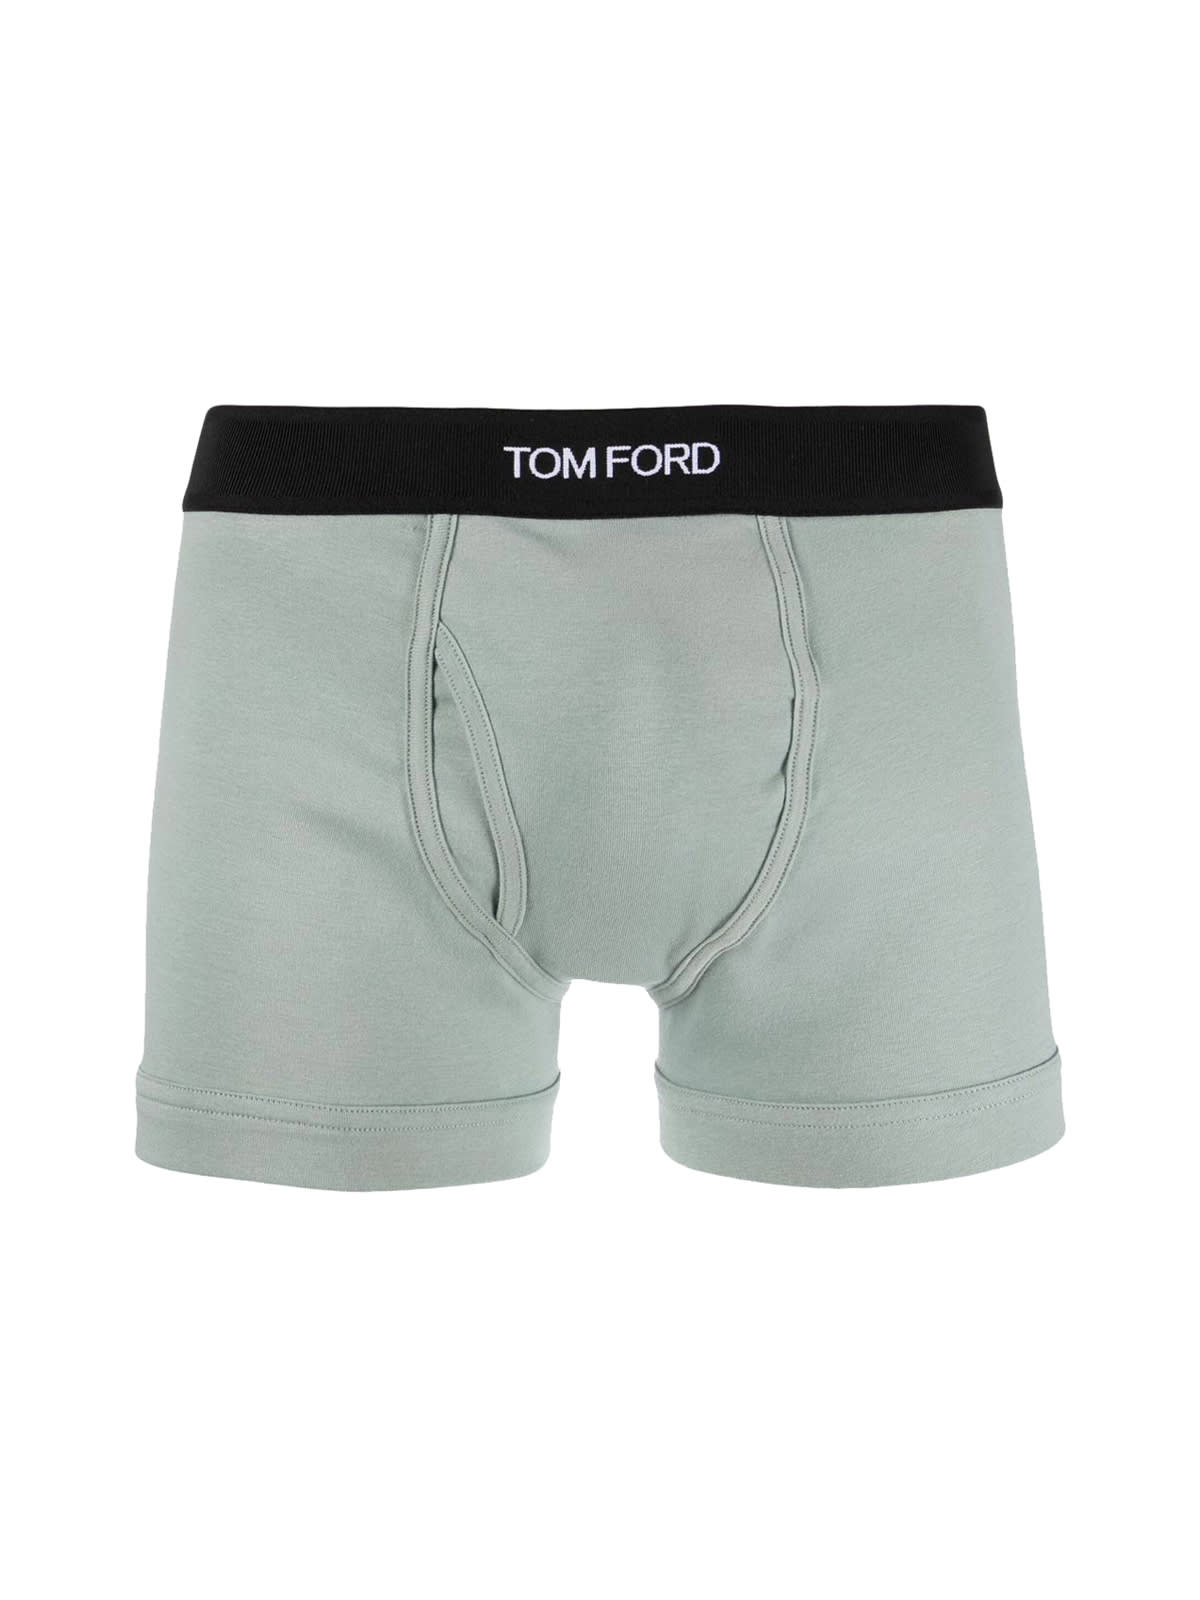 TOM FORD BOXER BRIEF